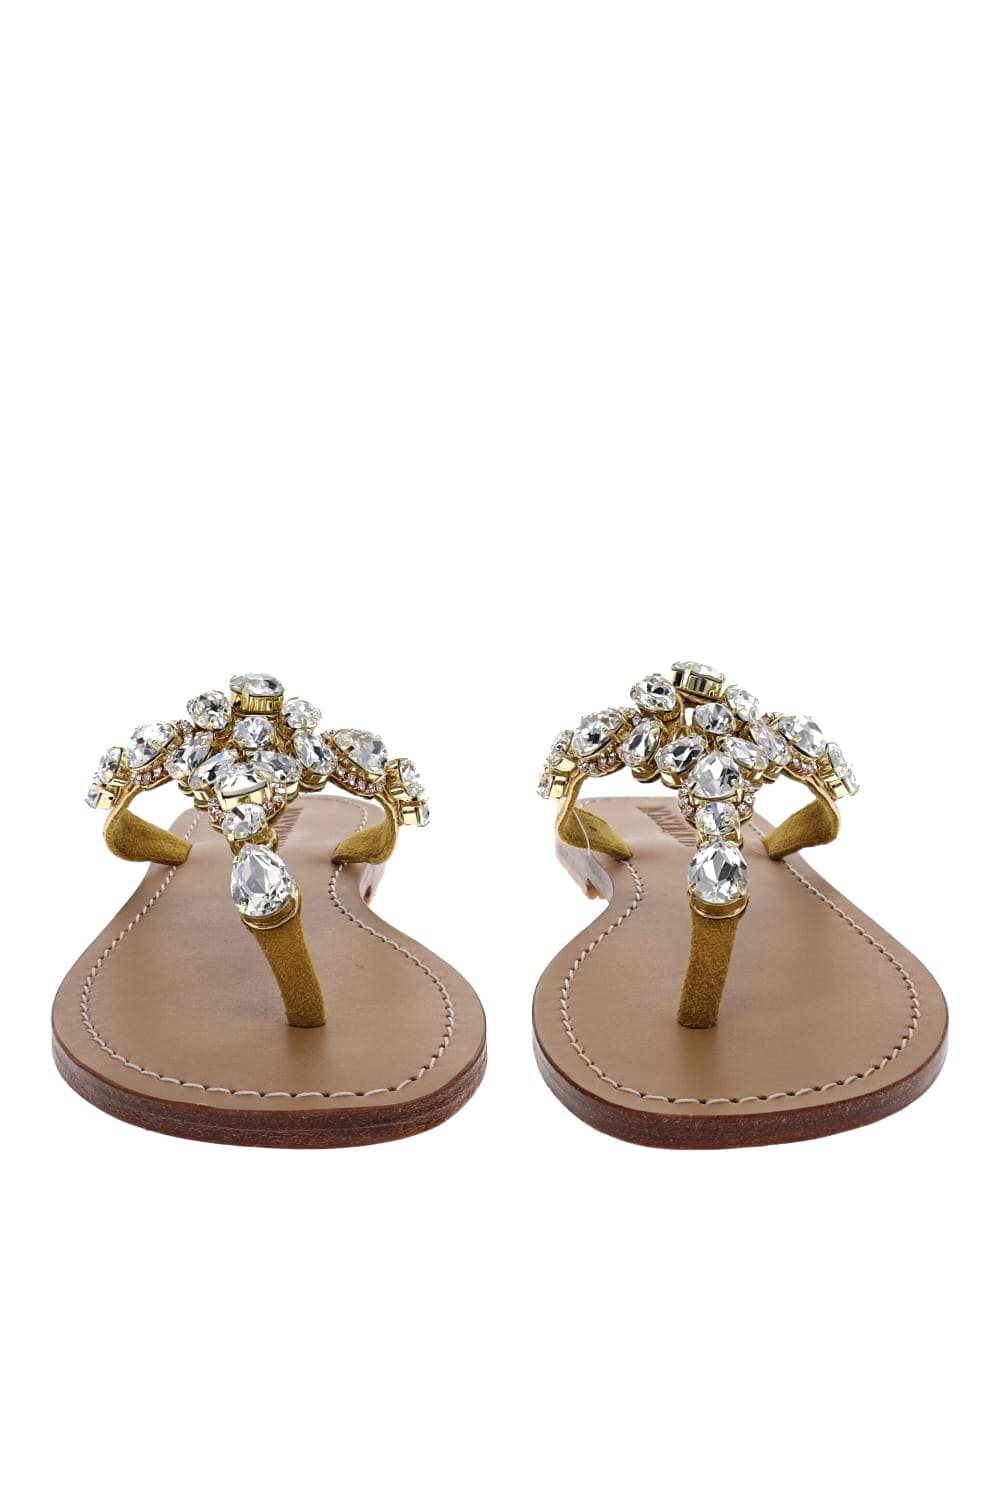 MYSTIQUE Gold Clear Crystal Sandal 8824 Gold/Clear